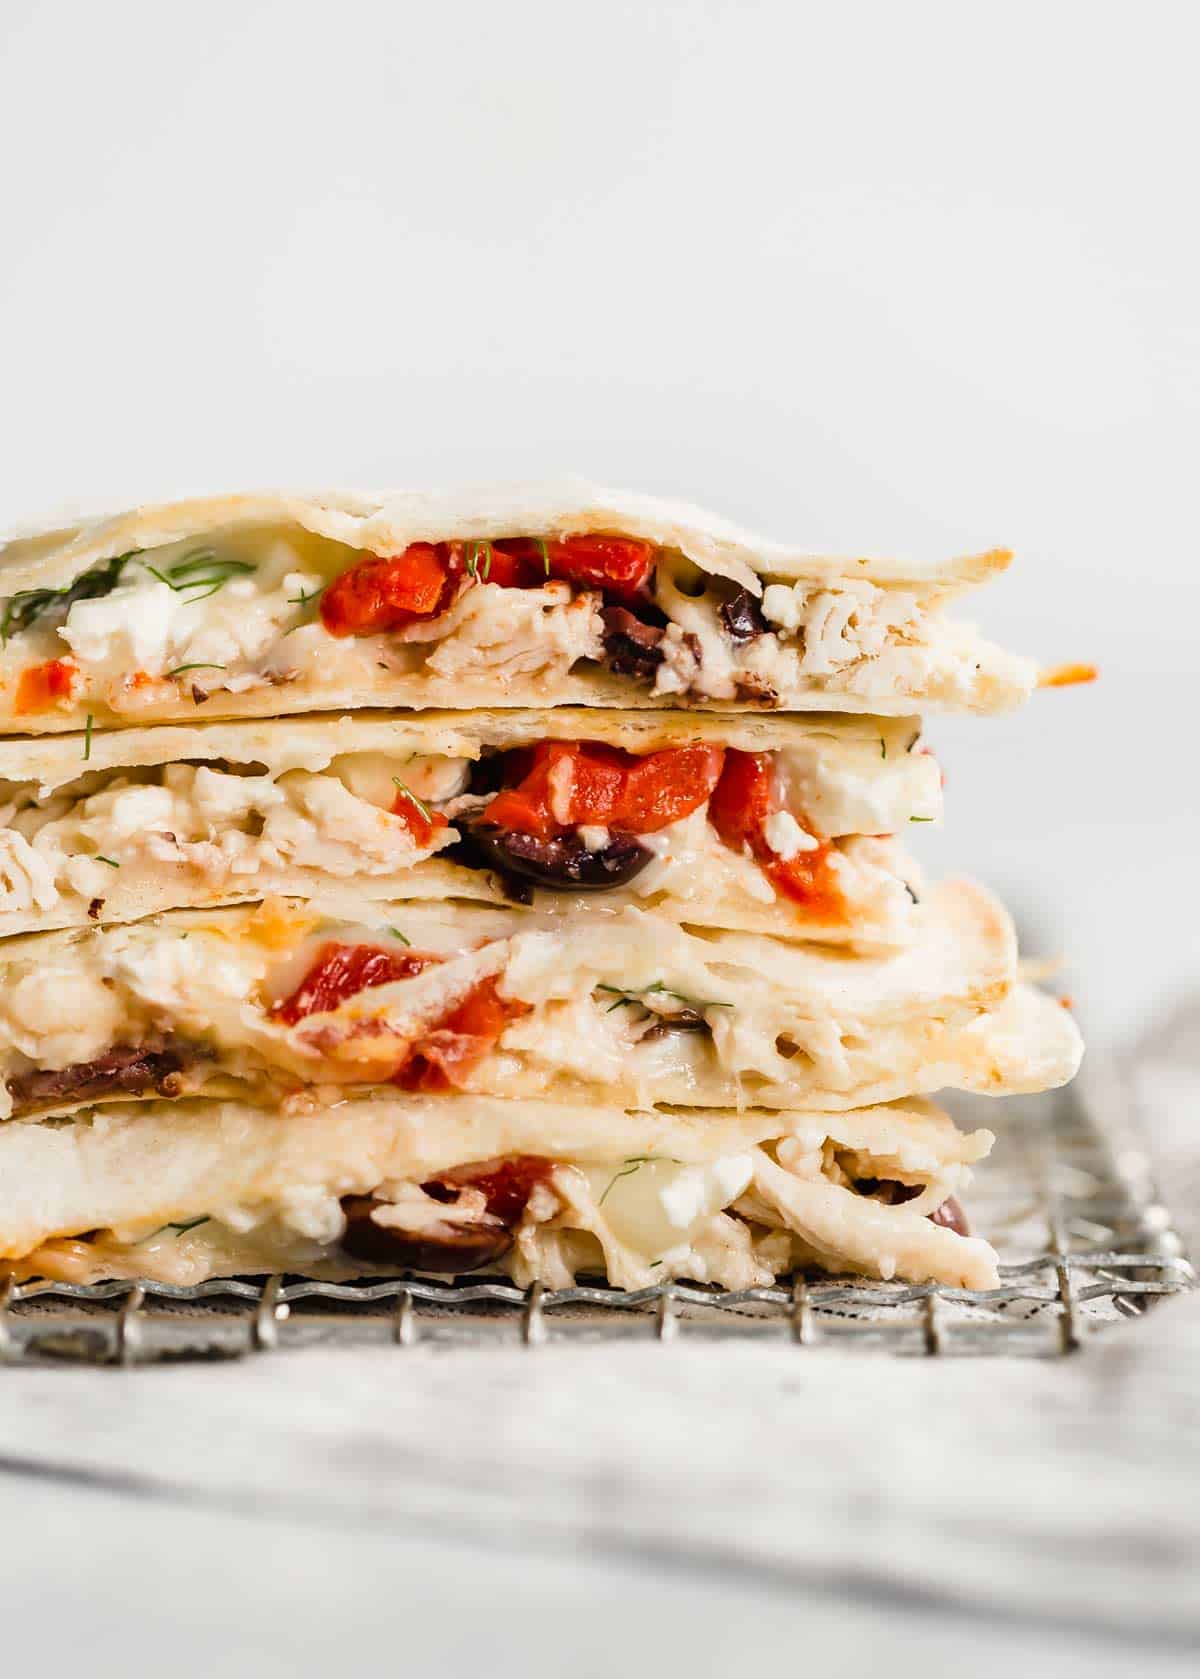 Close up photo of the a cut Greek Quesadilla with Kalamata olives, roasted red peppers, and shredded chicken.